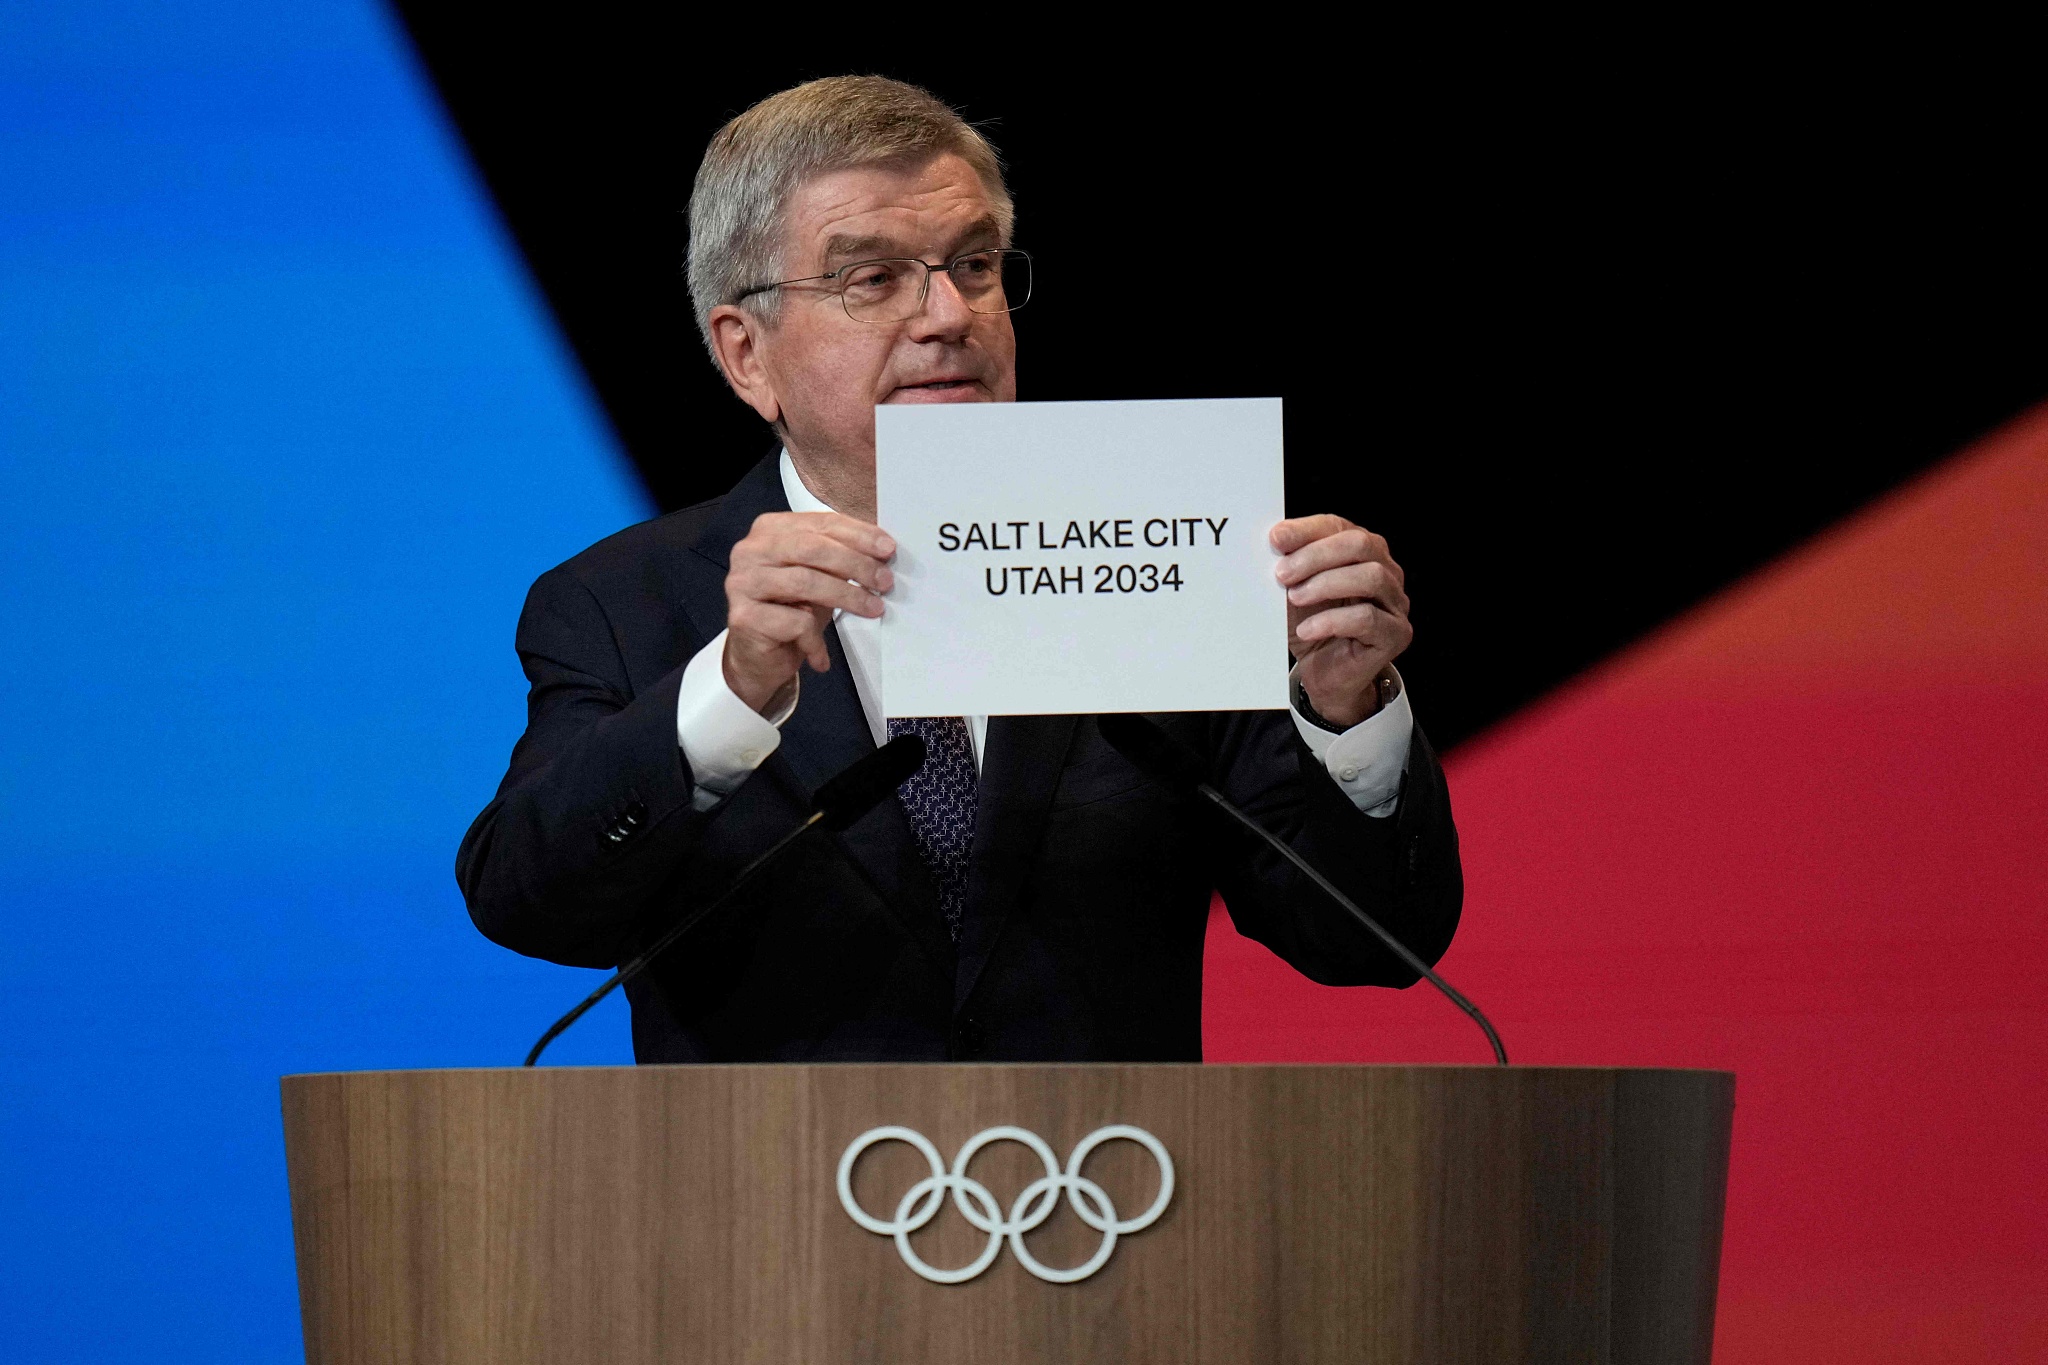 Thomas Bach, President of the International Olympic Committee (IOC), announces that Salt Lake City will host the 2034 Winter Olympics at the 142nd IOC Session in Paris, France, July 24, 2024. /CFP